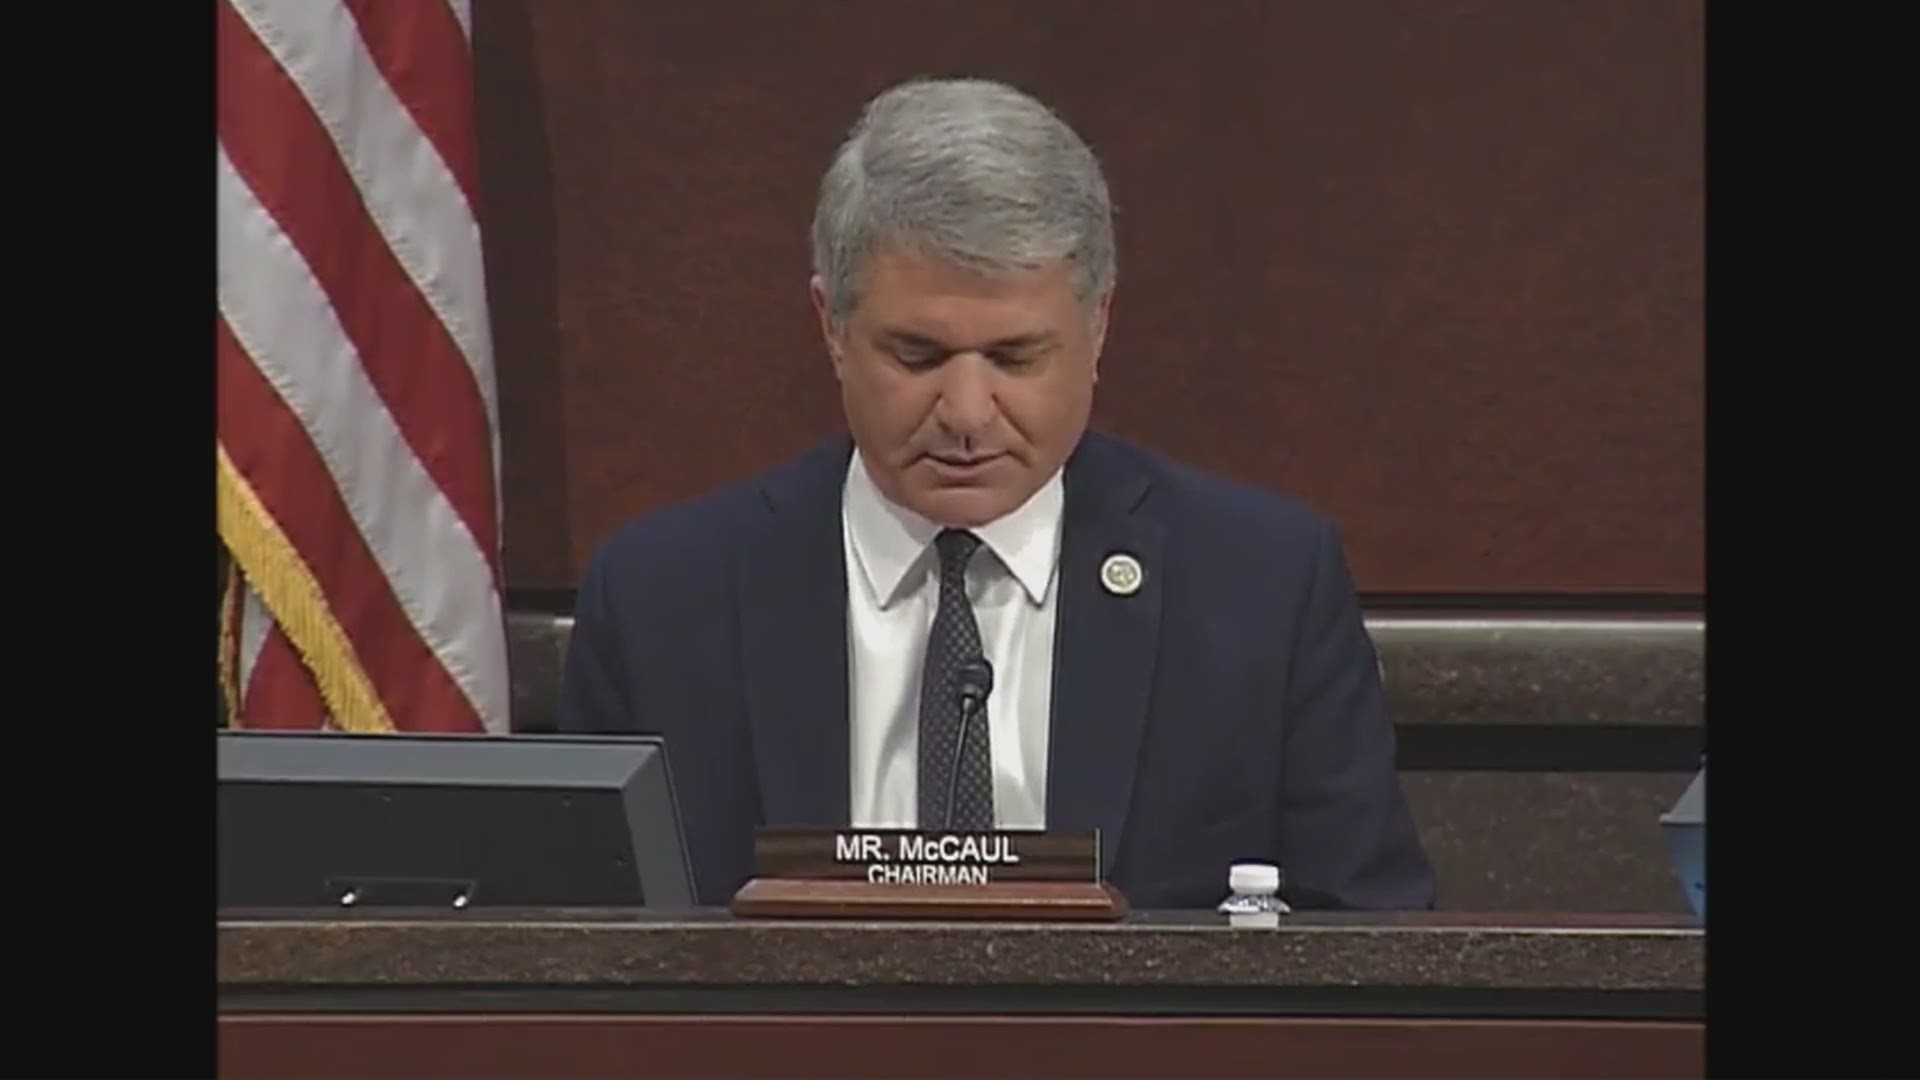 Texas Rep. McCaul gave an opening statement during a meeting in Washington D.C. and recalled how opportunities for additional steps could have been taken during the Boston Marathon to improve the investigation. Since then, investigators have made a variet